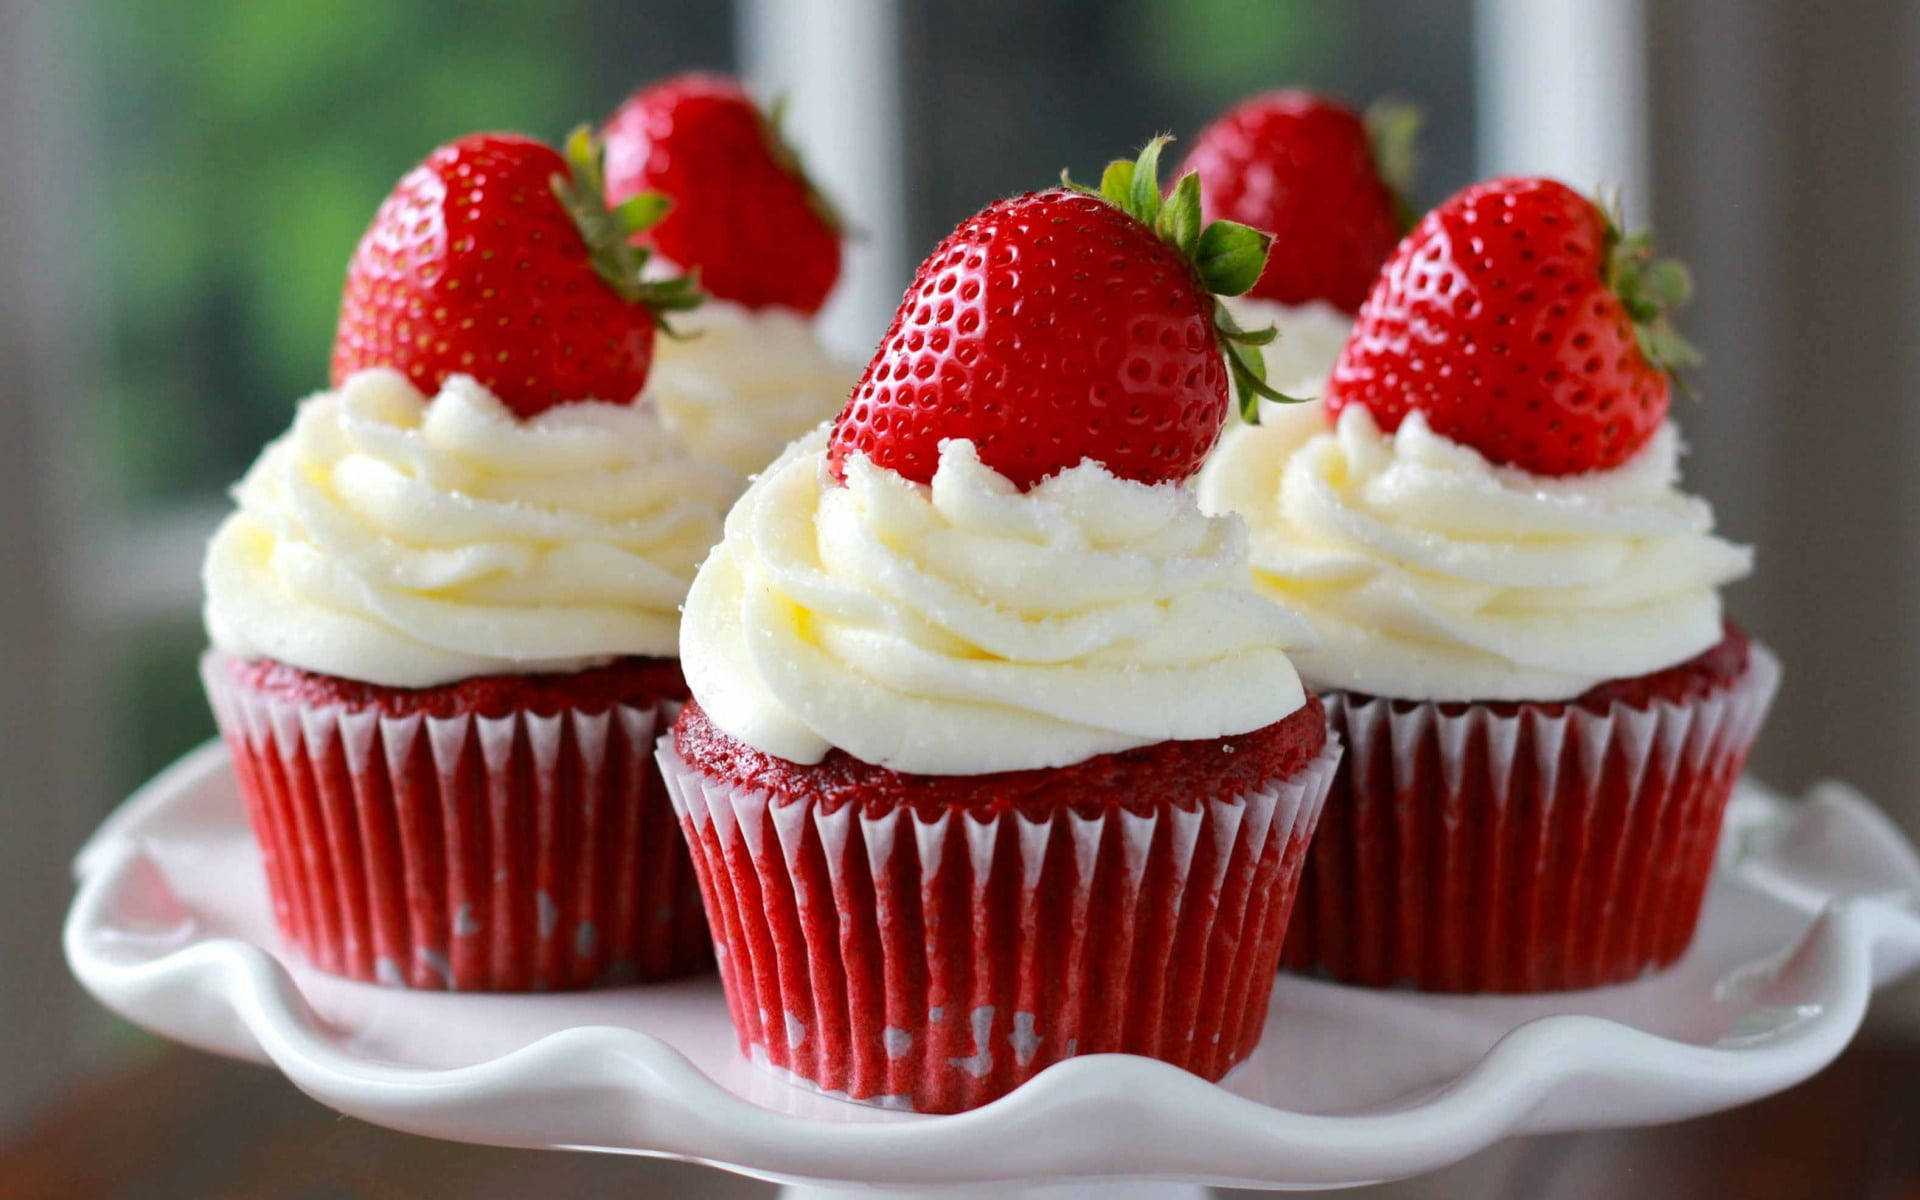 Red Cupcakes With Strawberry Desktop Wallpaper